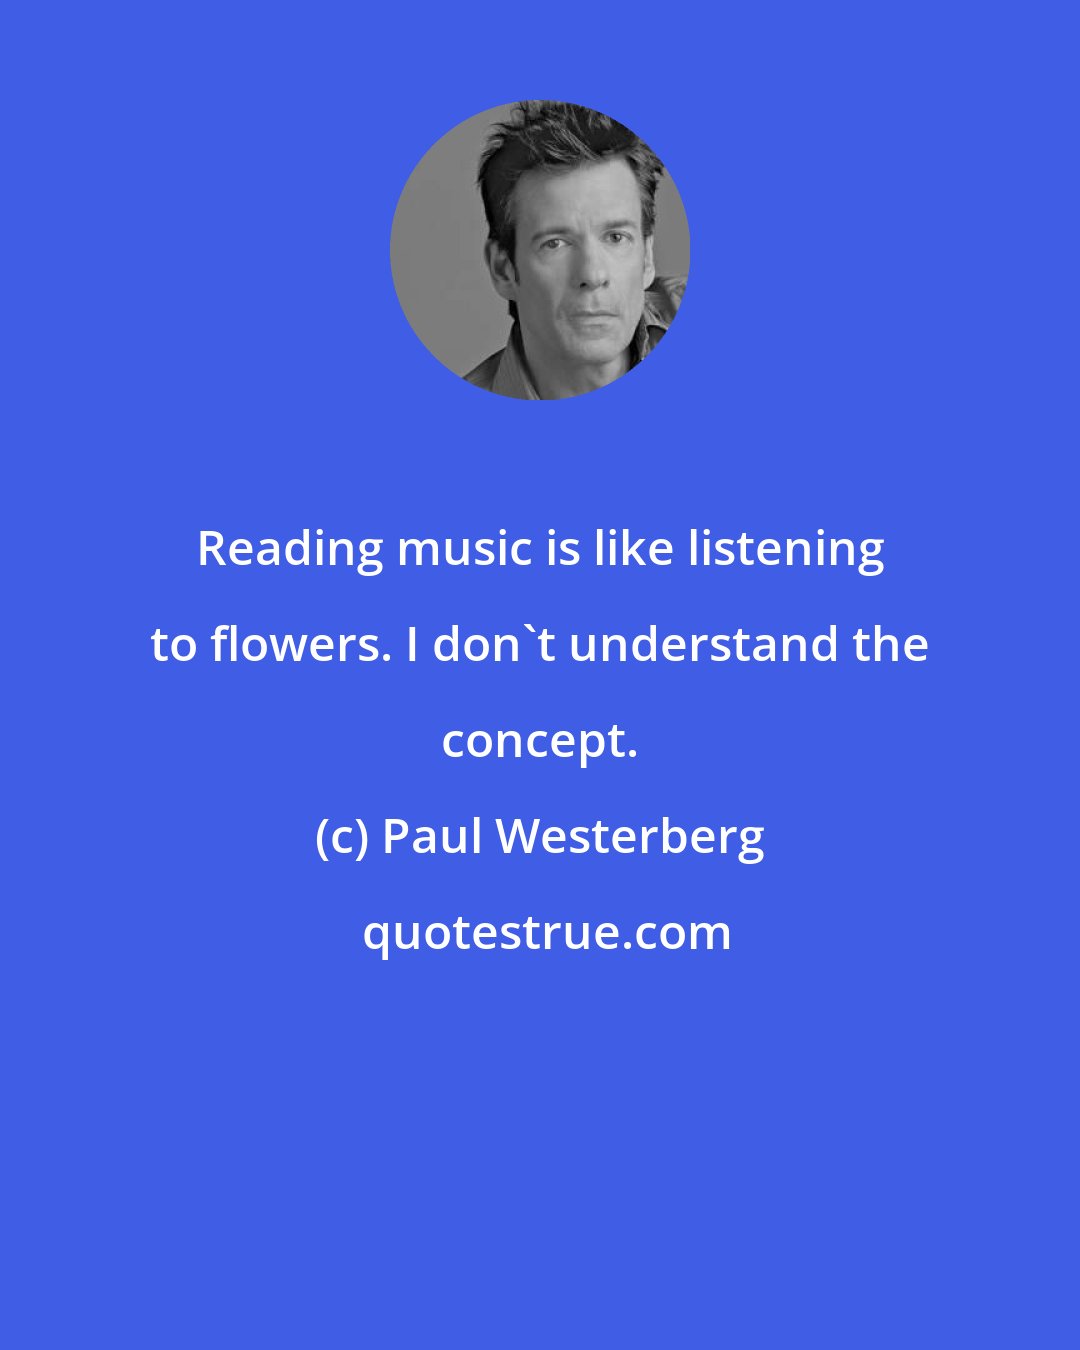 Paul Westerberg: Reading music is like listening to flowers. I don't understand the concept.